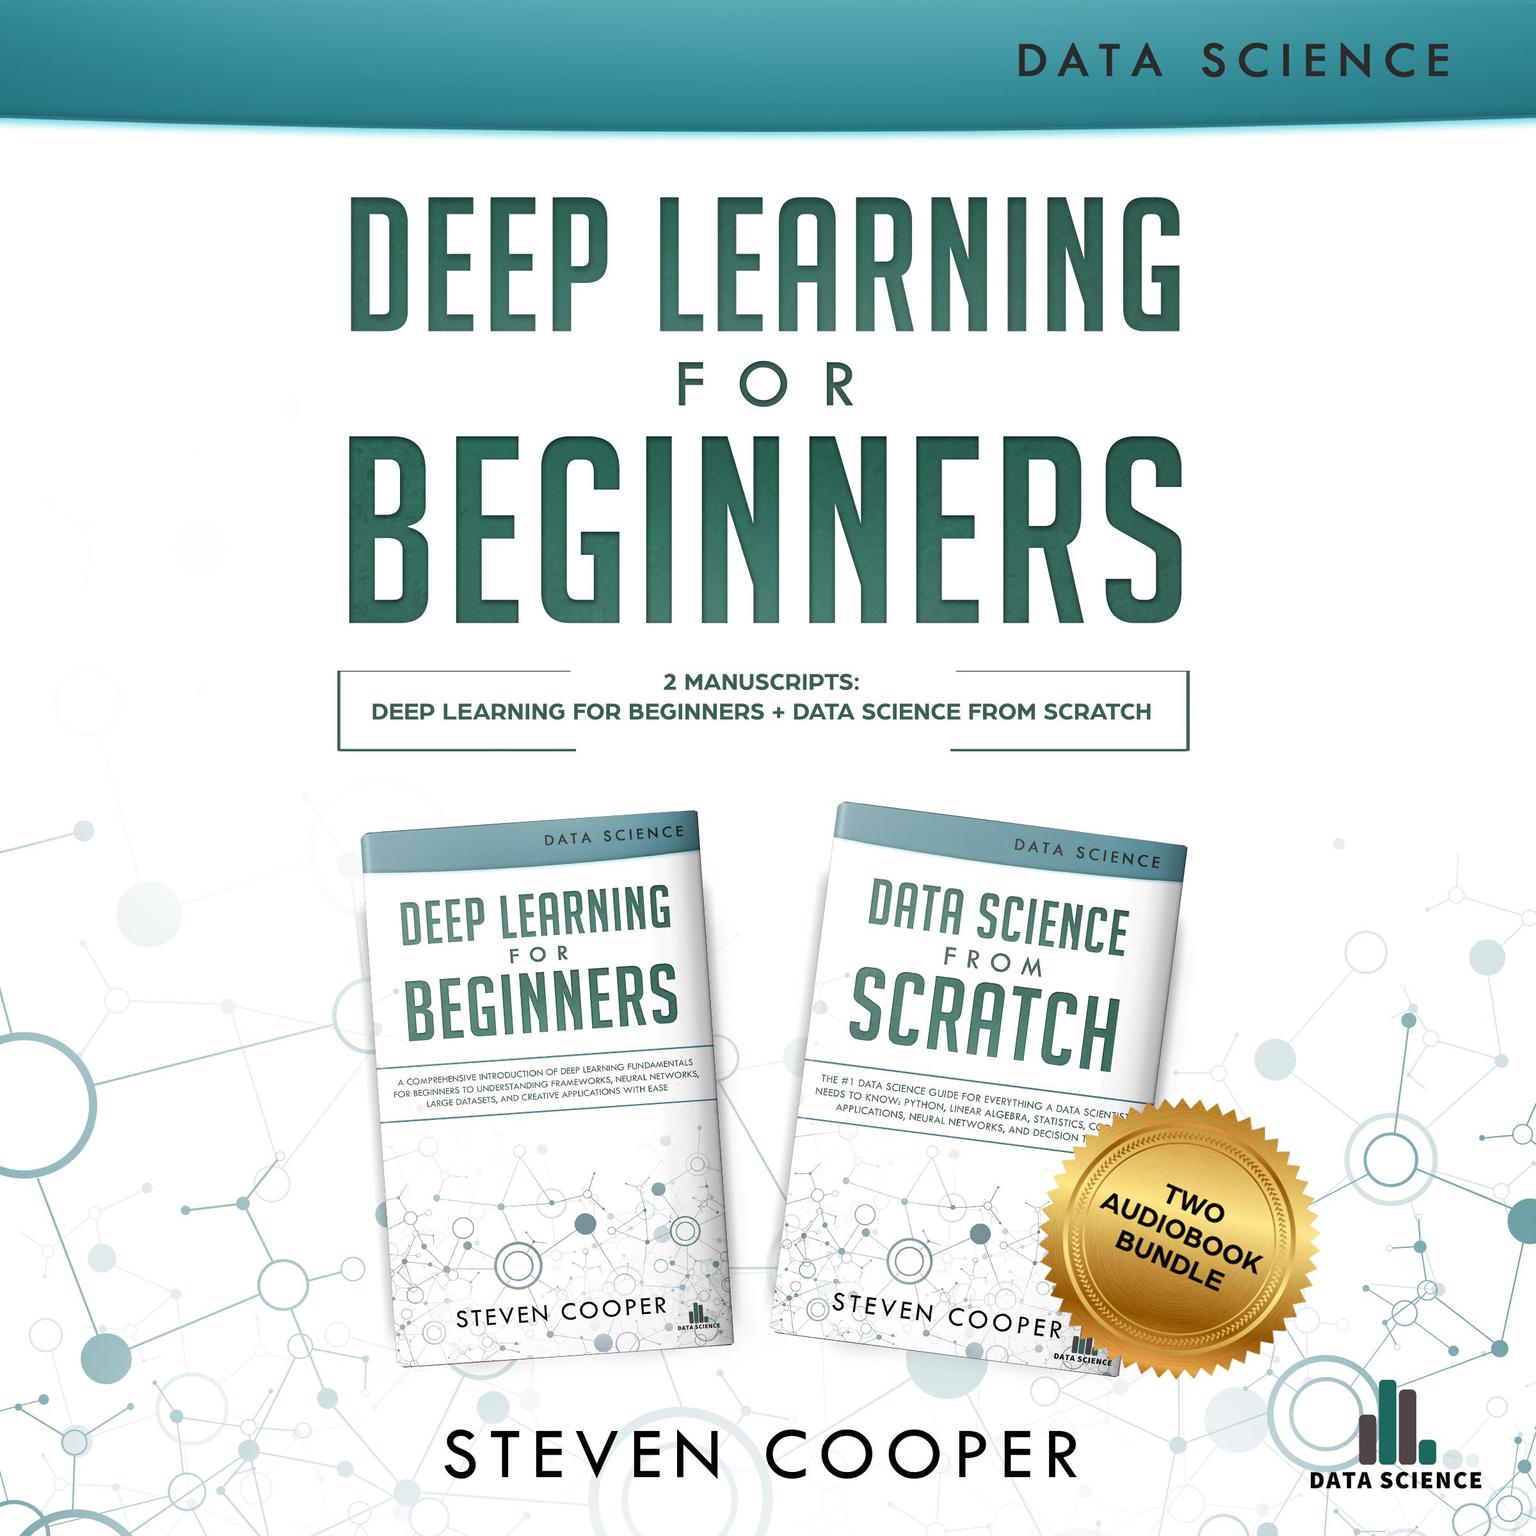 Deep Learning for Beginners: 2 in 1 Audiobook, by Steven Cooper